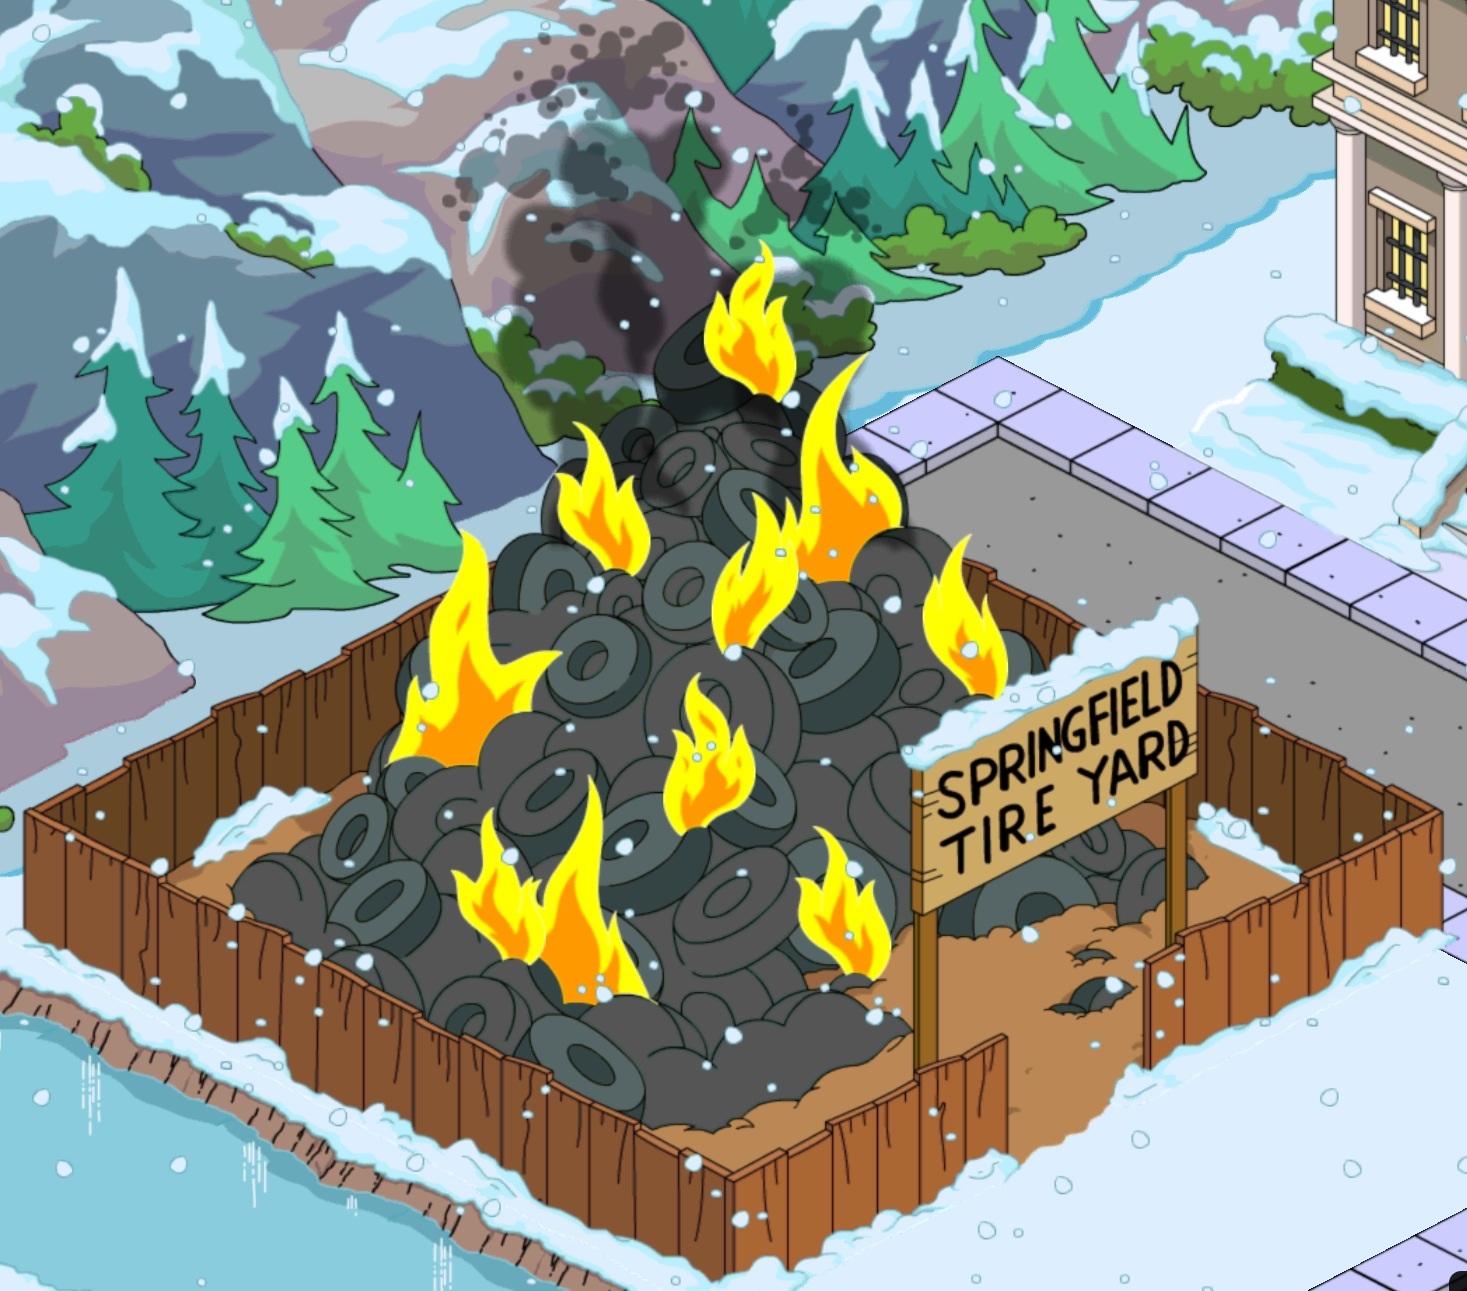 the Springfield Tire Fire.